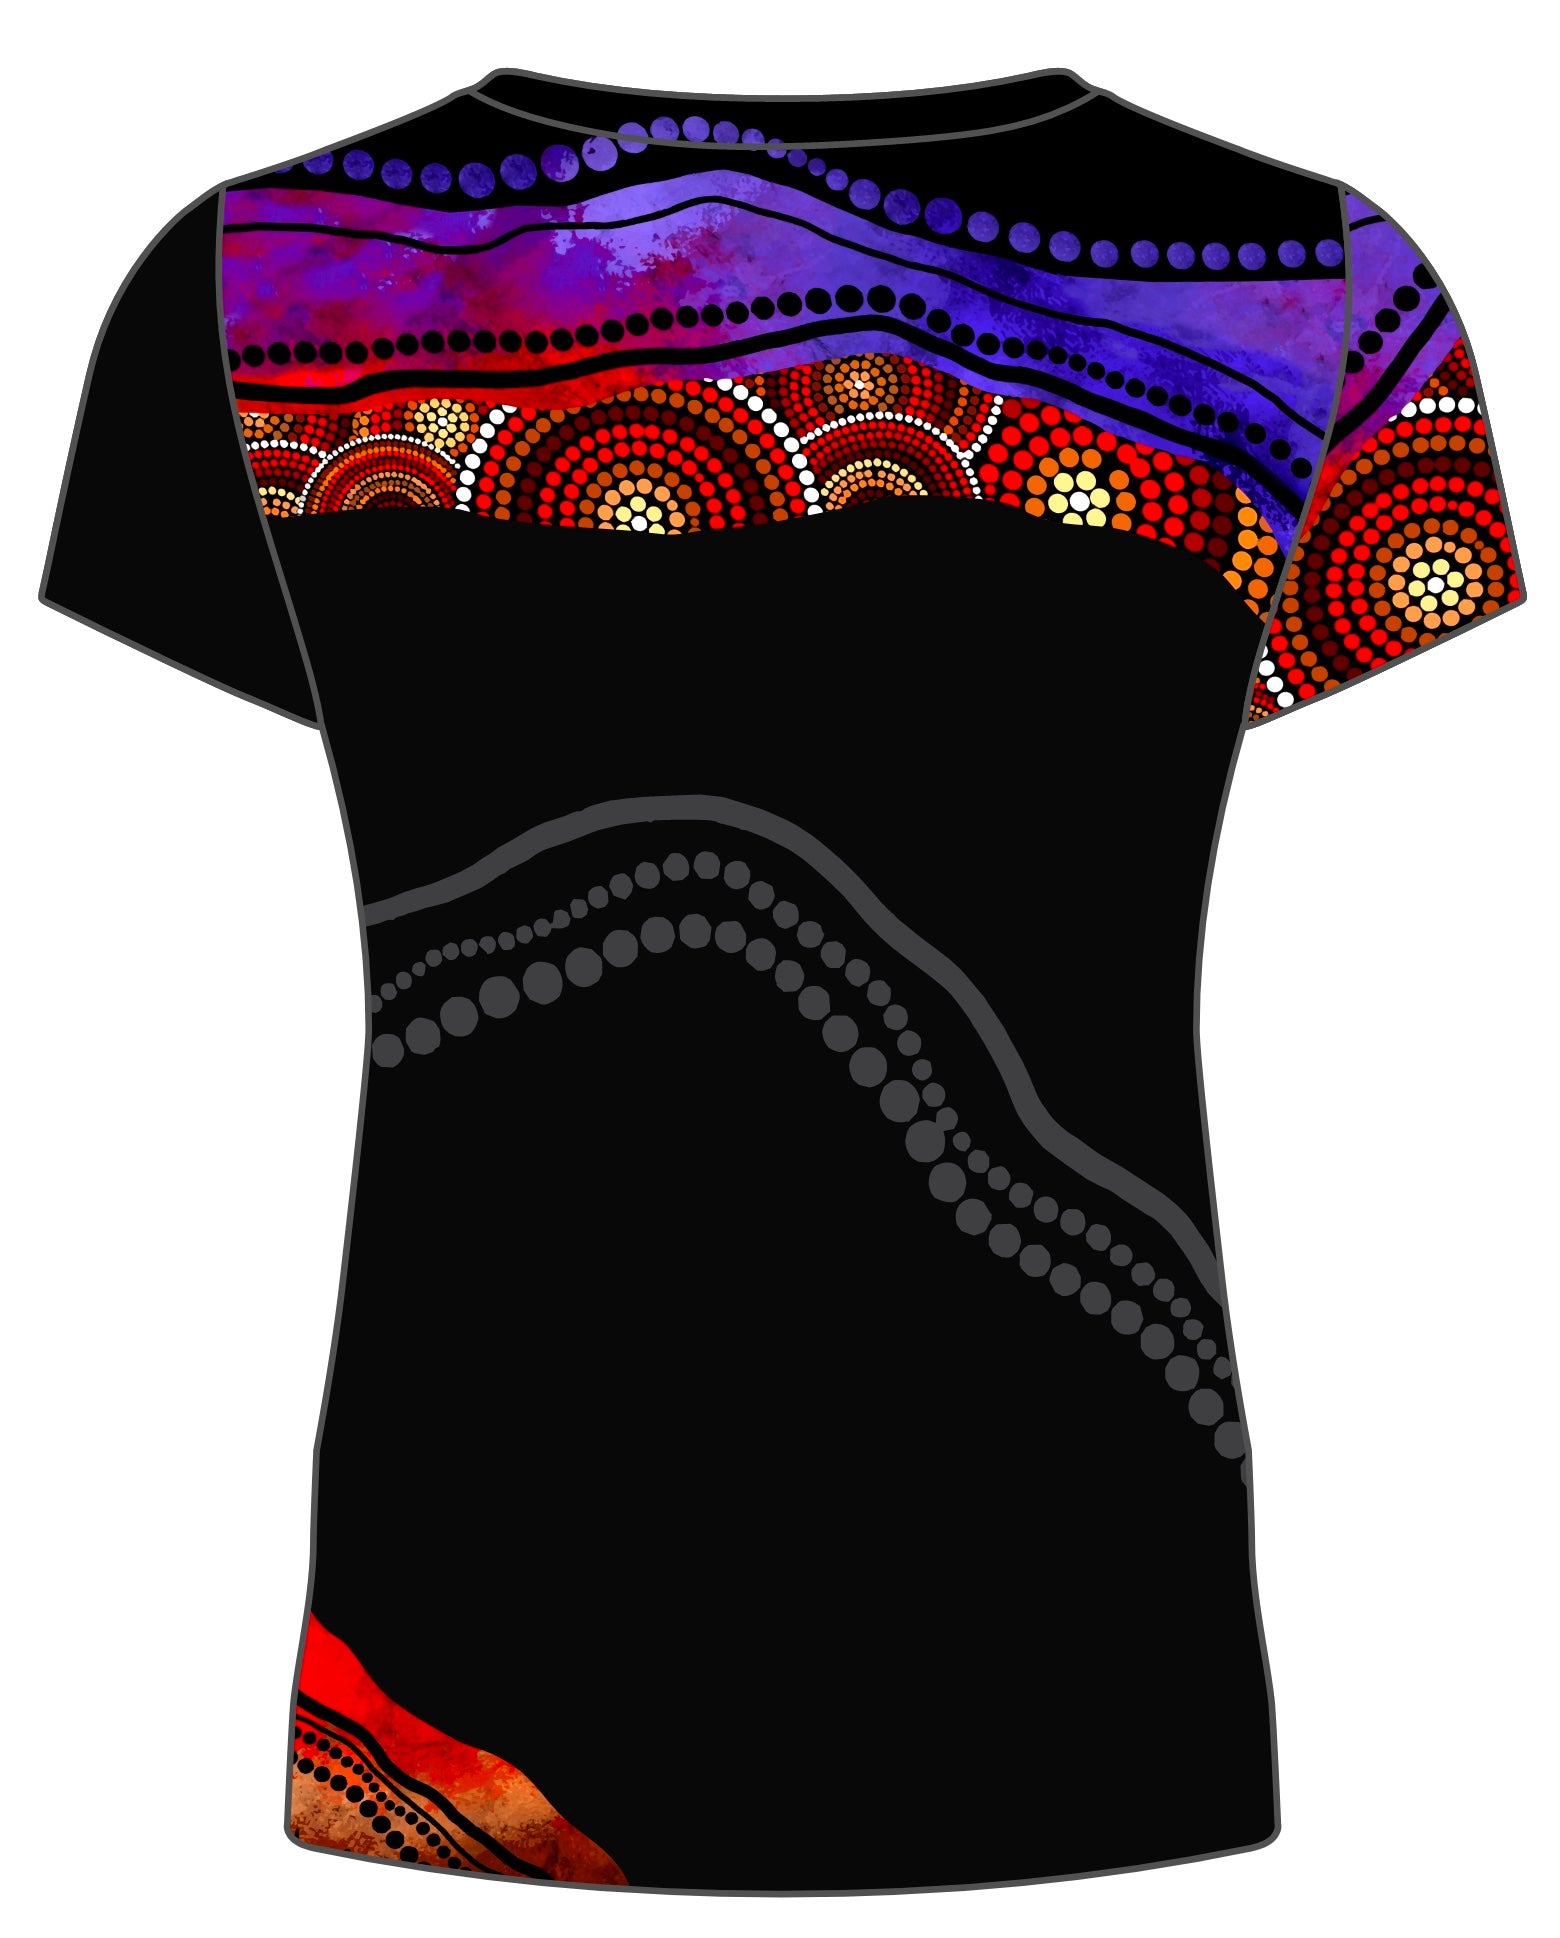 CUSTOM FITTED TOP FOR UNITING COUNTRY SA